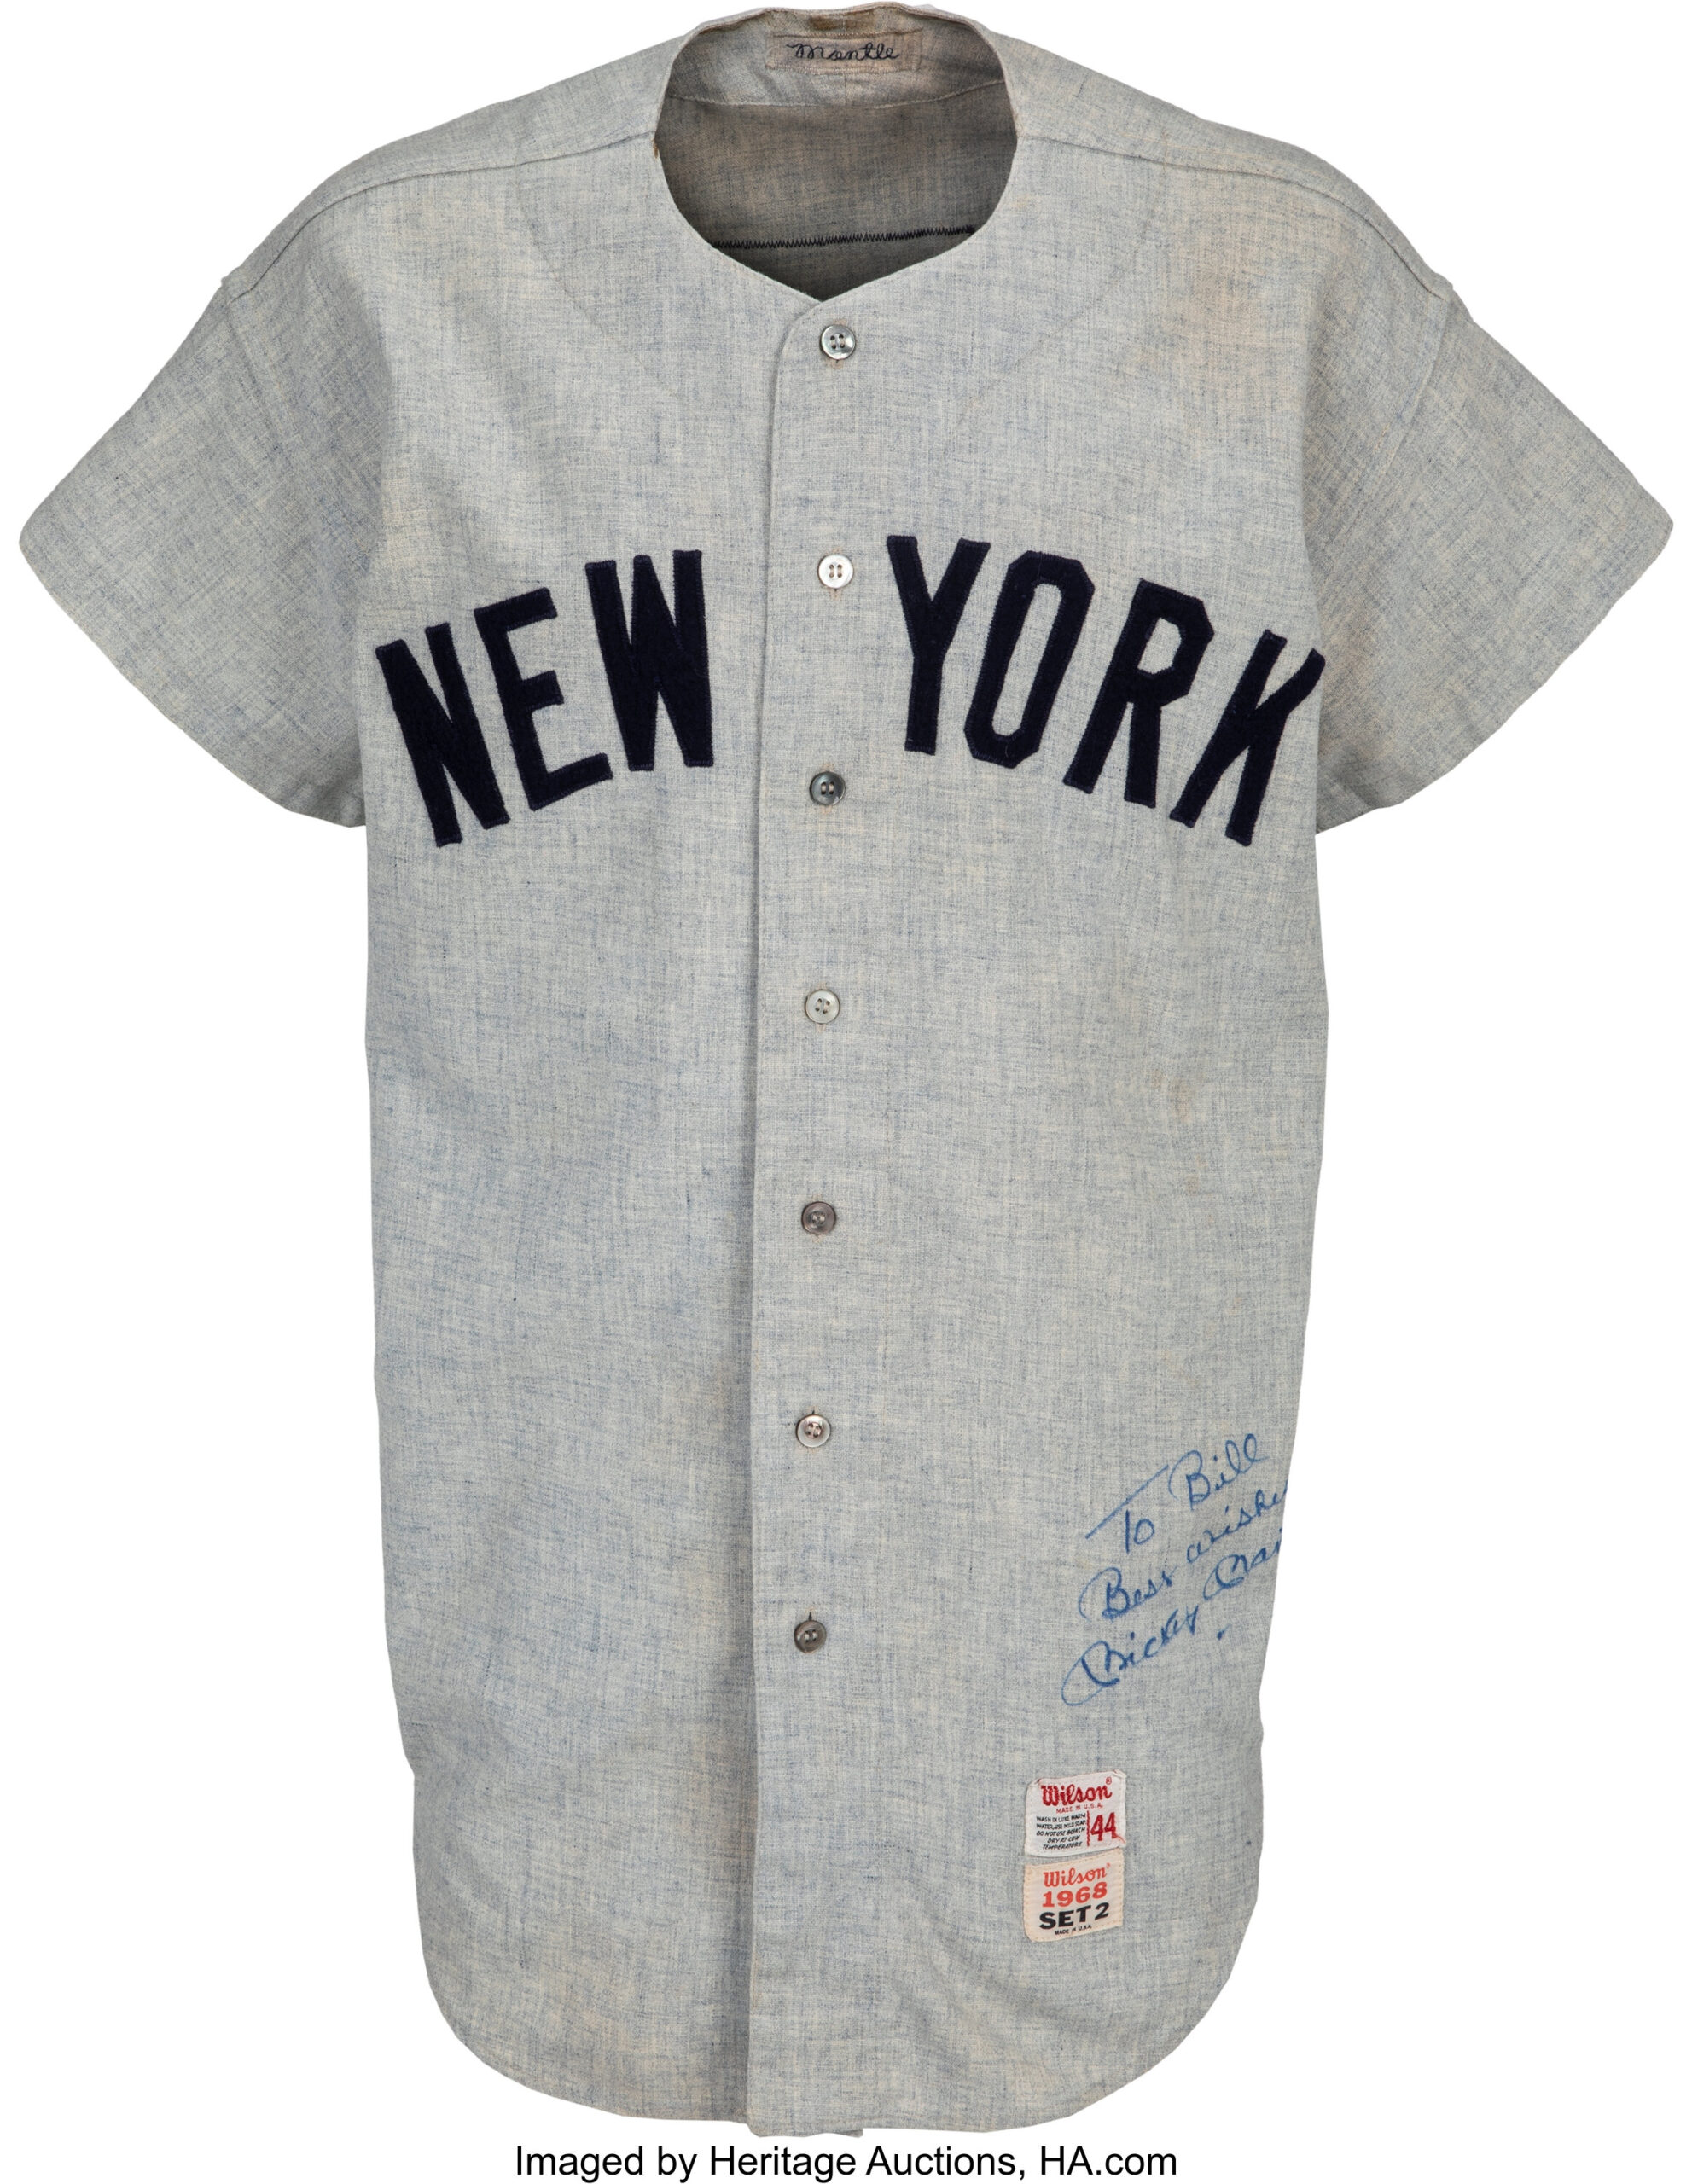 1968 Mickey Mantle game-worn and signed New York Yankees jersey